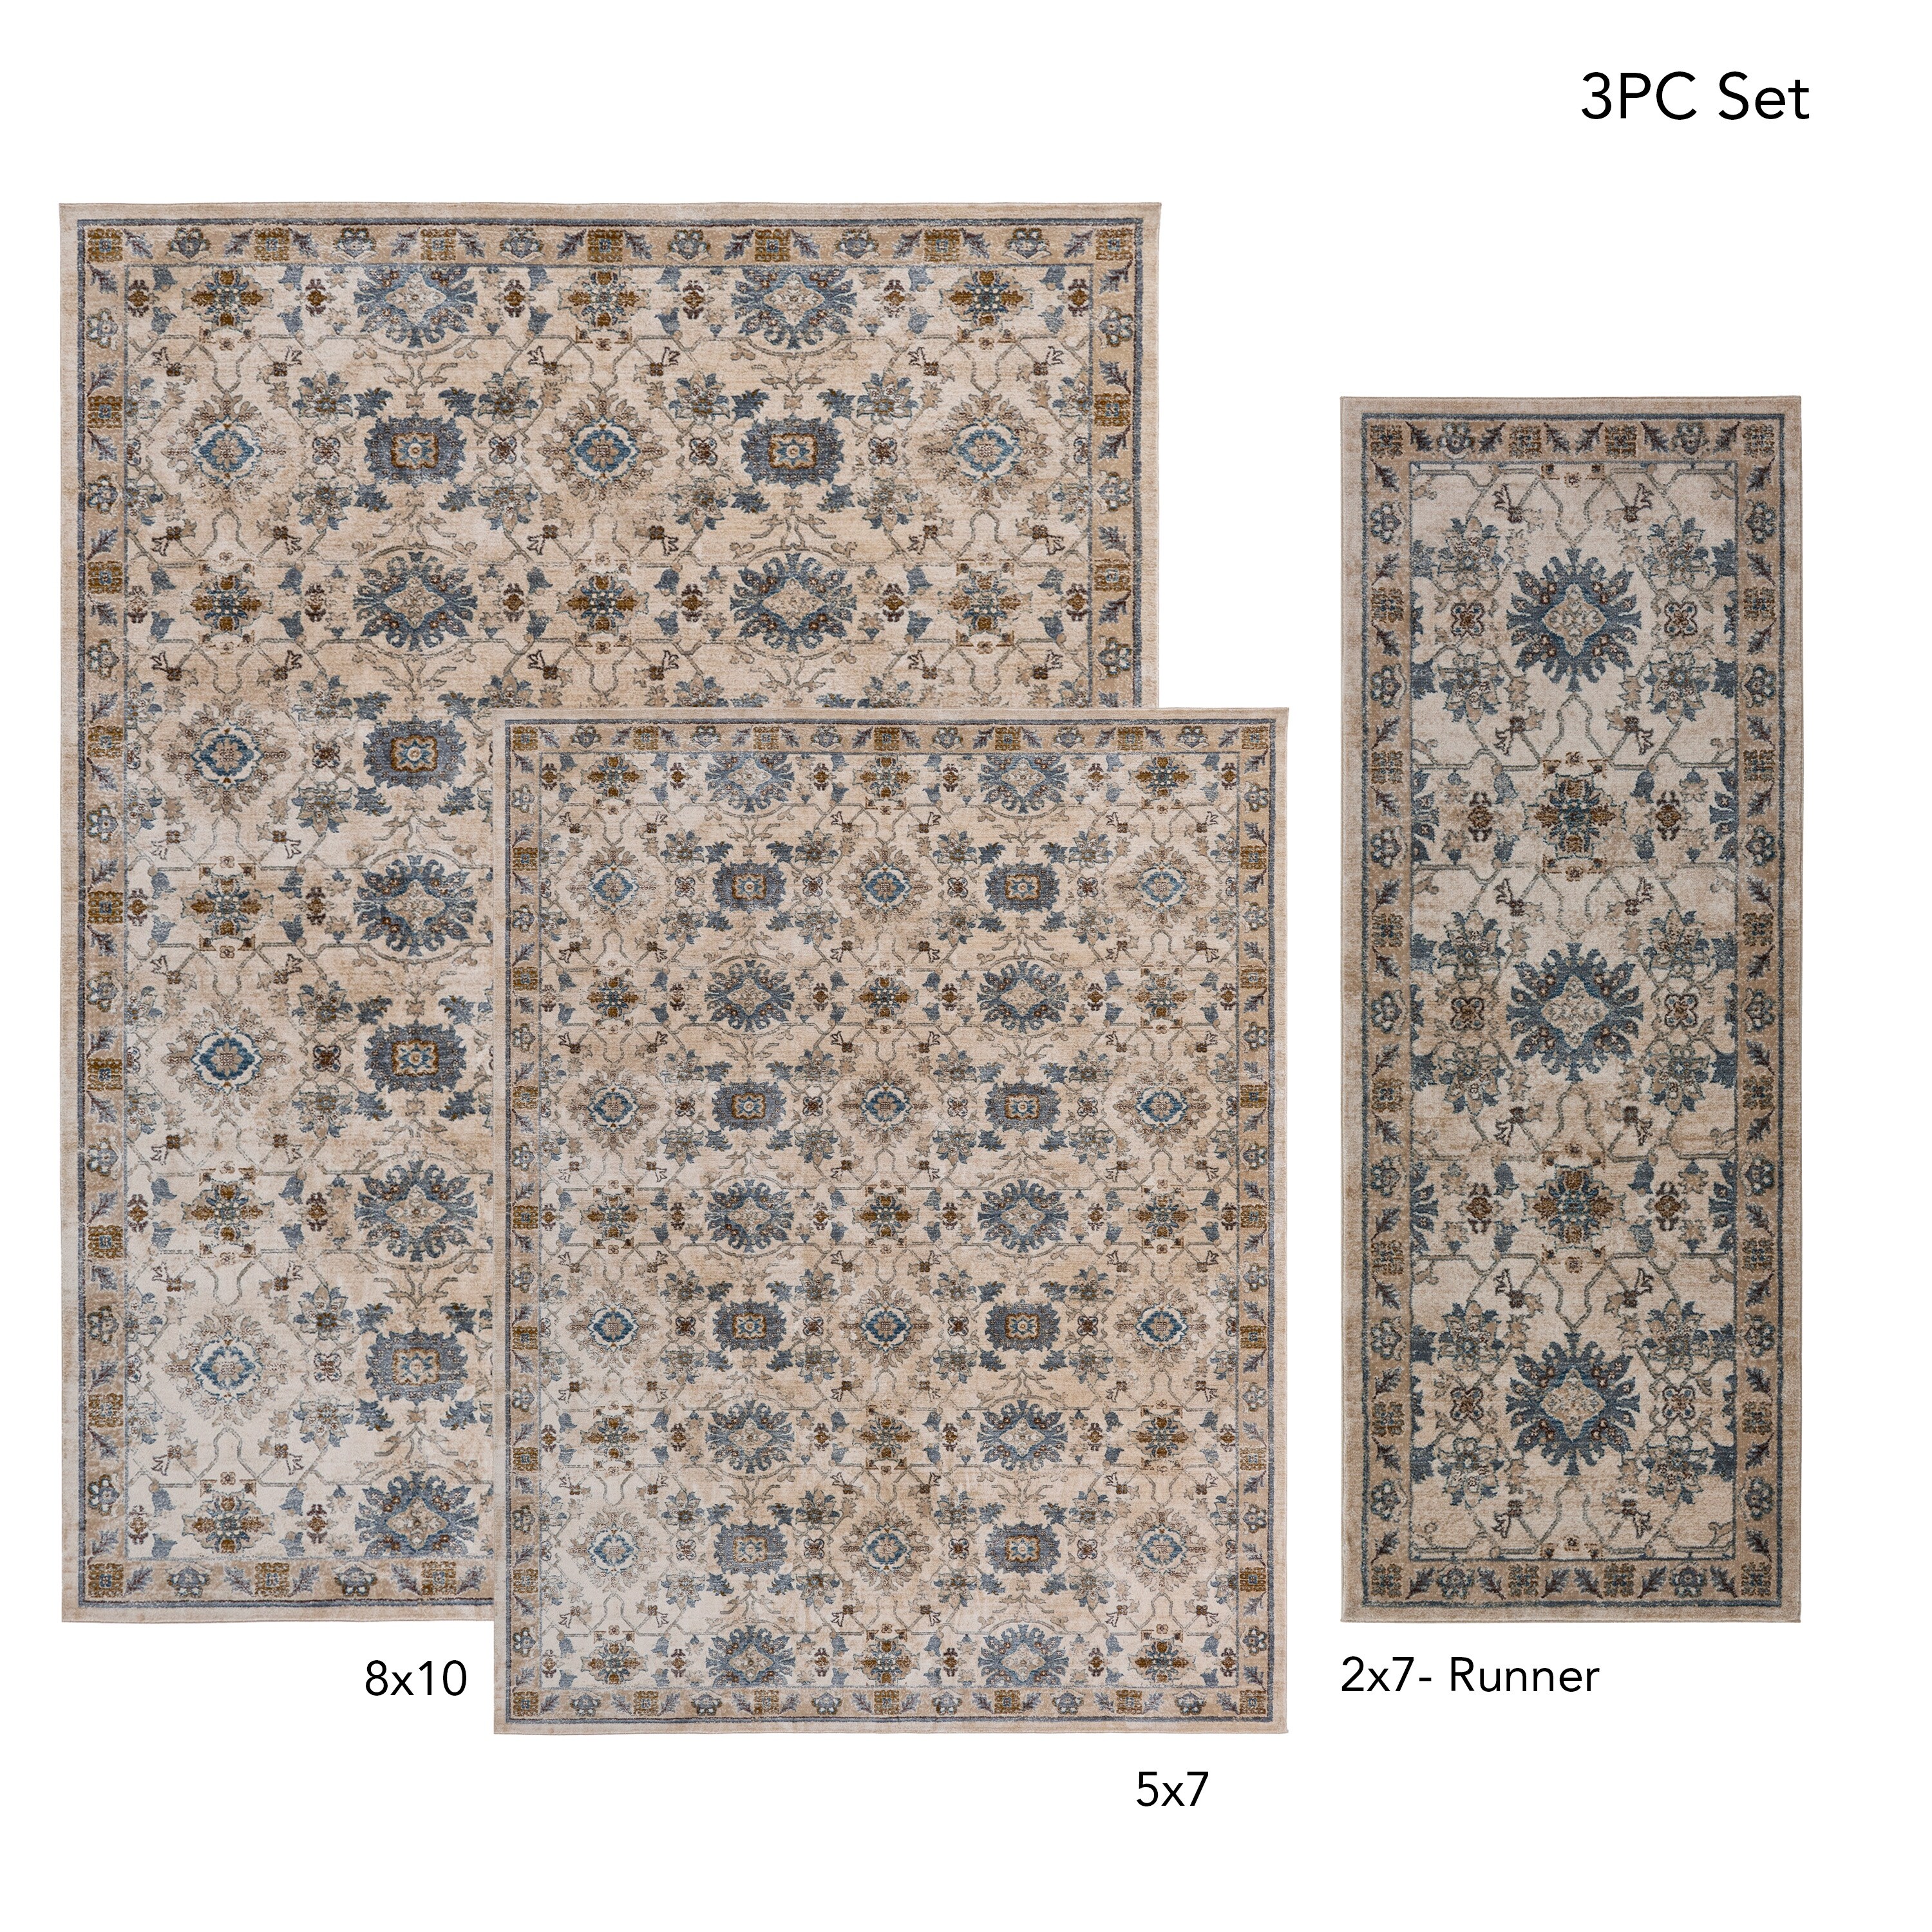 Floransa Blue Medallion Runner, 2x7, Sold by at Home